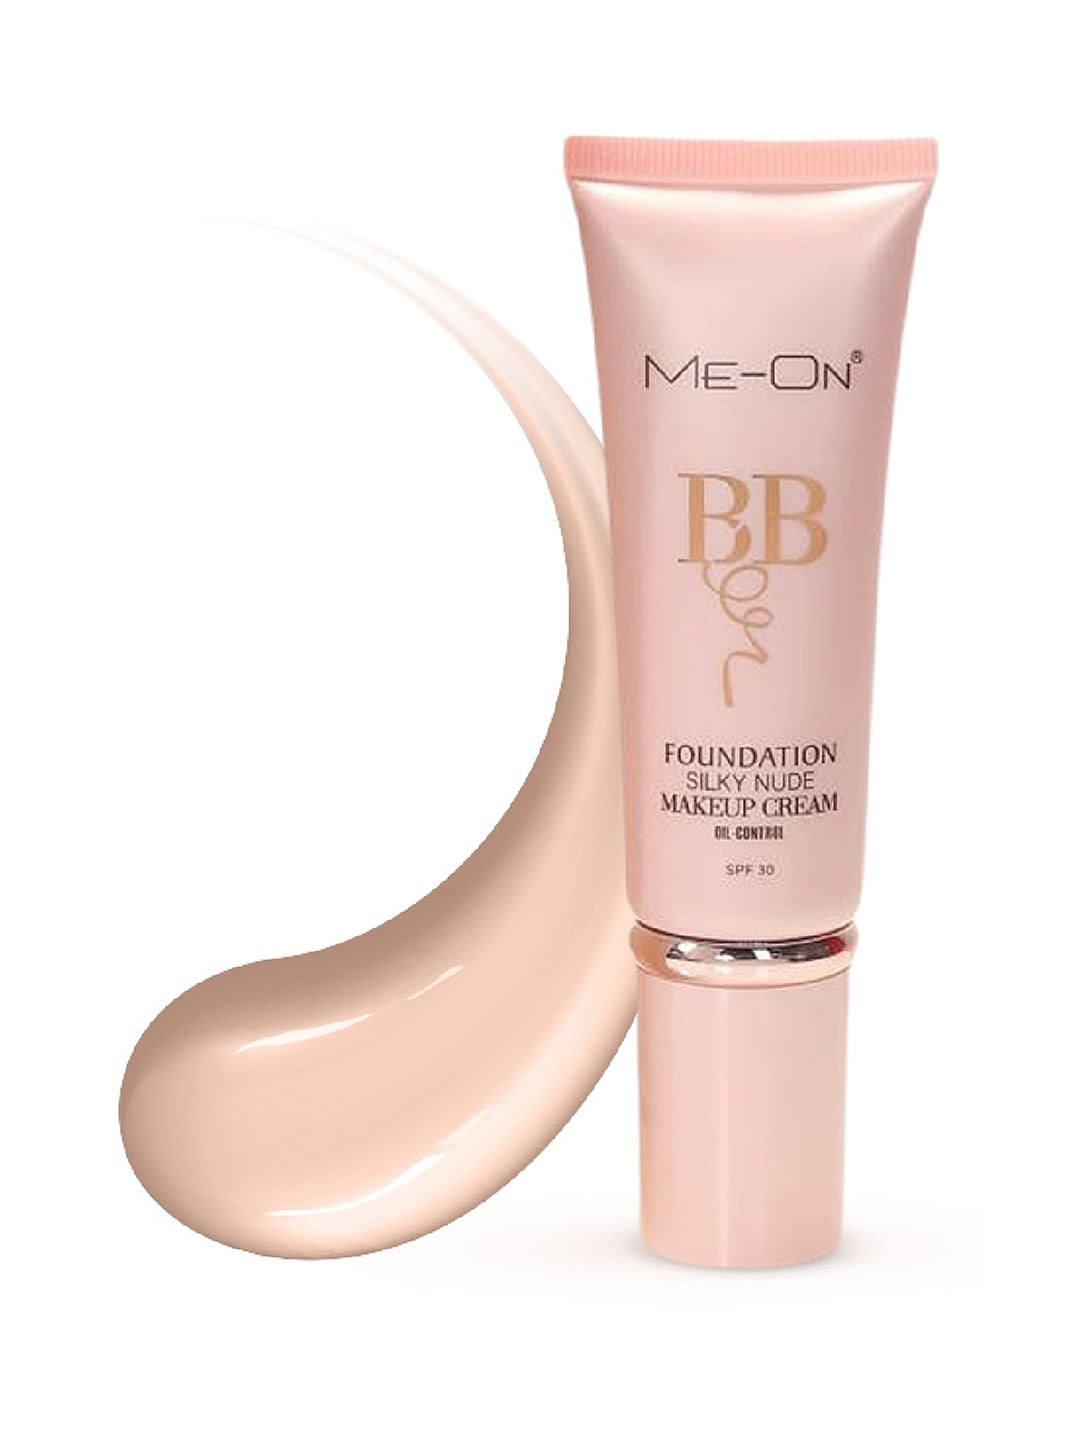 ME-ON BB Foundation Oil Control - Shade 21 Price in India